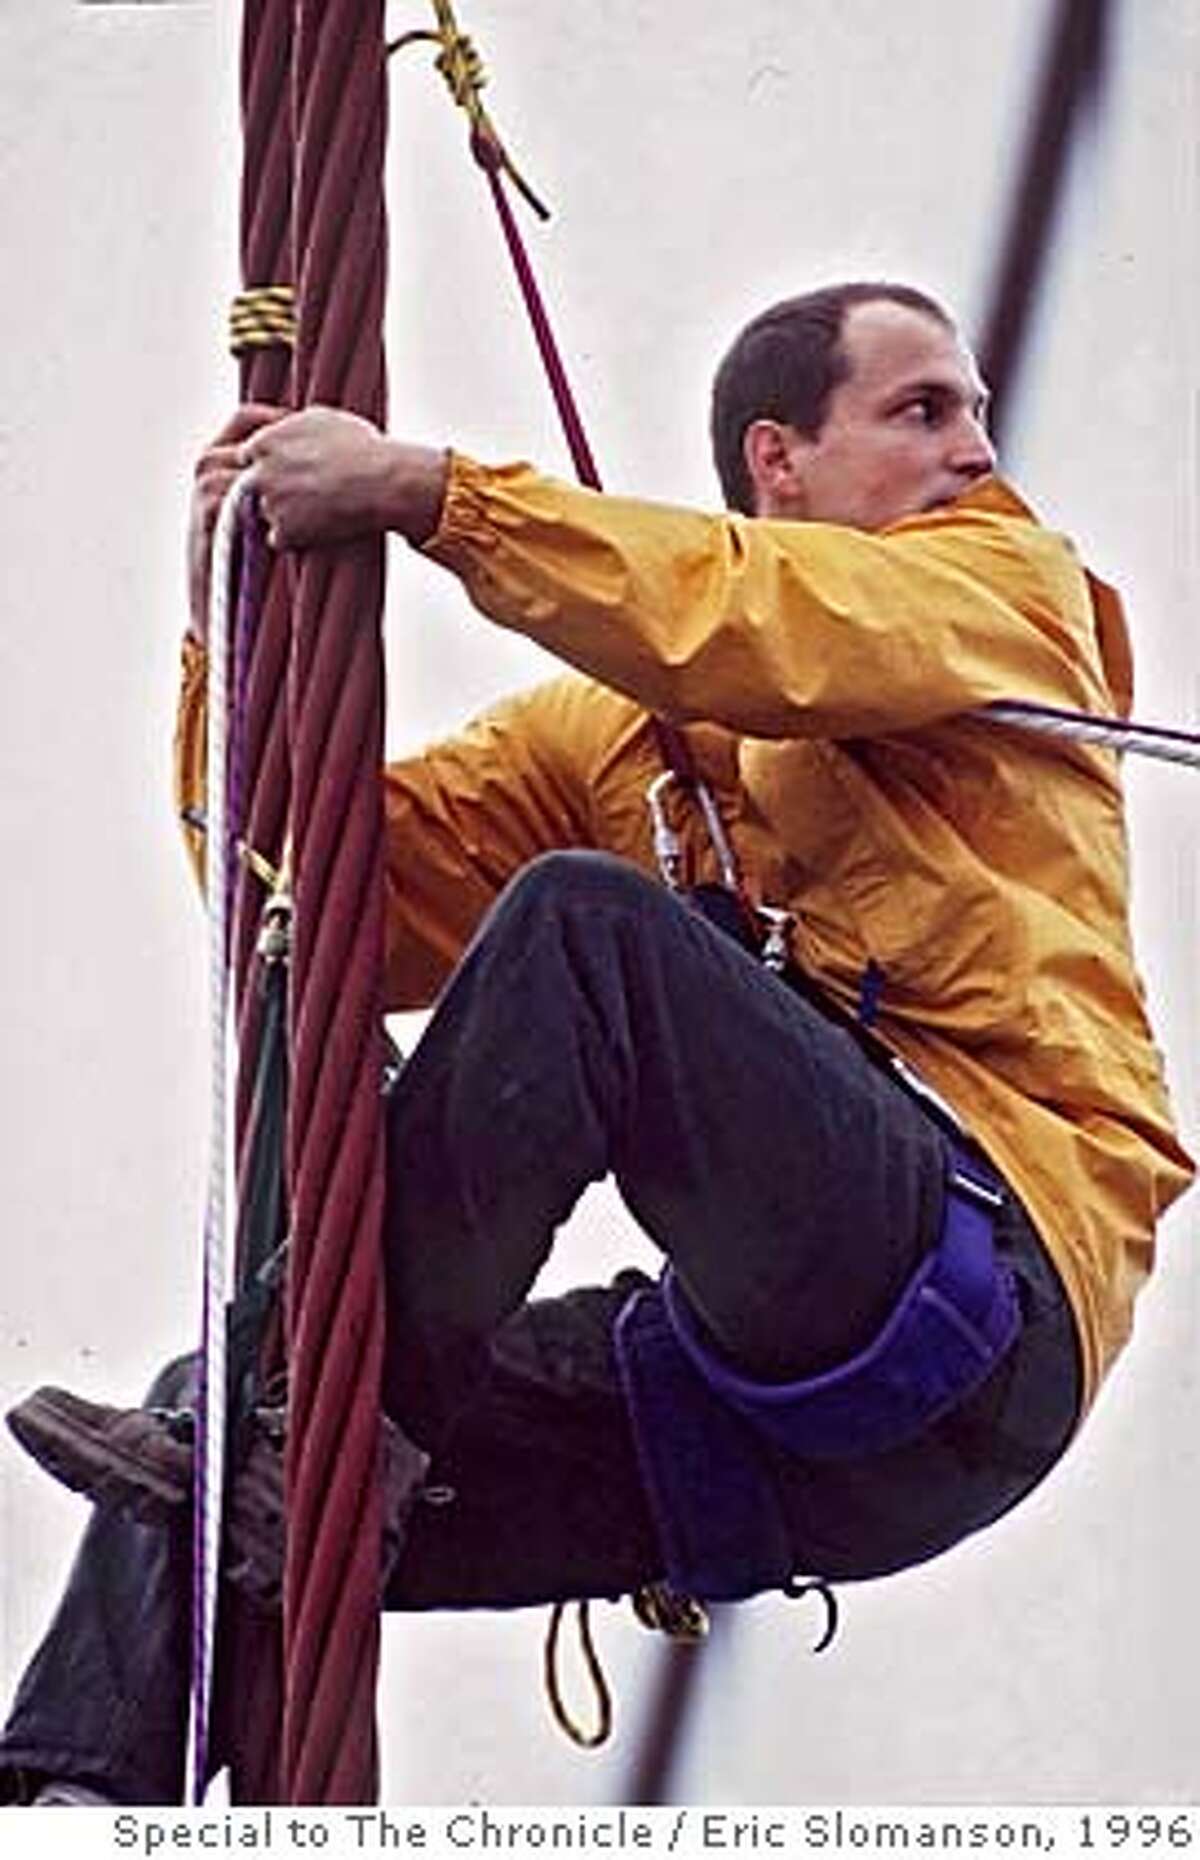 WOODY-BRIDGE/c/23NOV96/MN/FREE;ES ---- is shown climbing on the supports of the Golden Gate Bridge during a Headwaters protest on November 23rd. He was arrested with other demonstrators, and was arraigned for the offense today (1/14/97) in SF. FILE Photo / Special to The Chronicle by Eric Slomanson ALSO RAN: 6/30/97